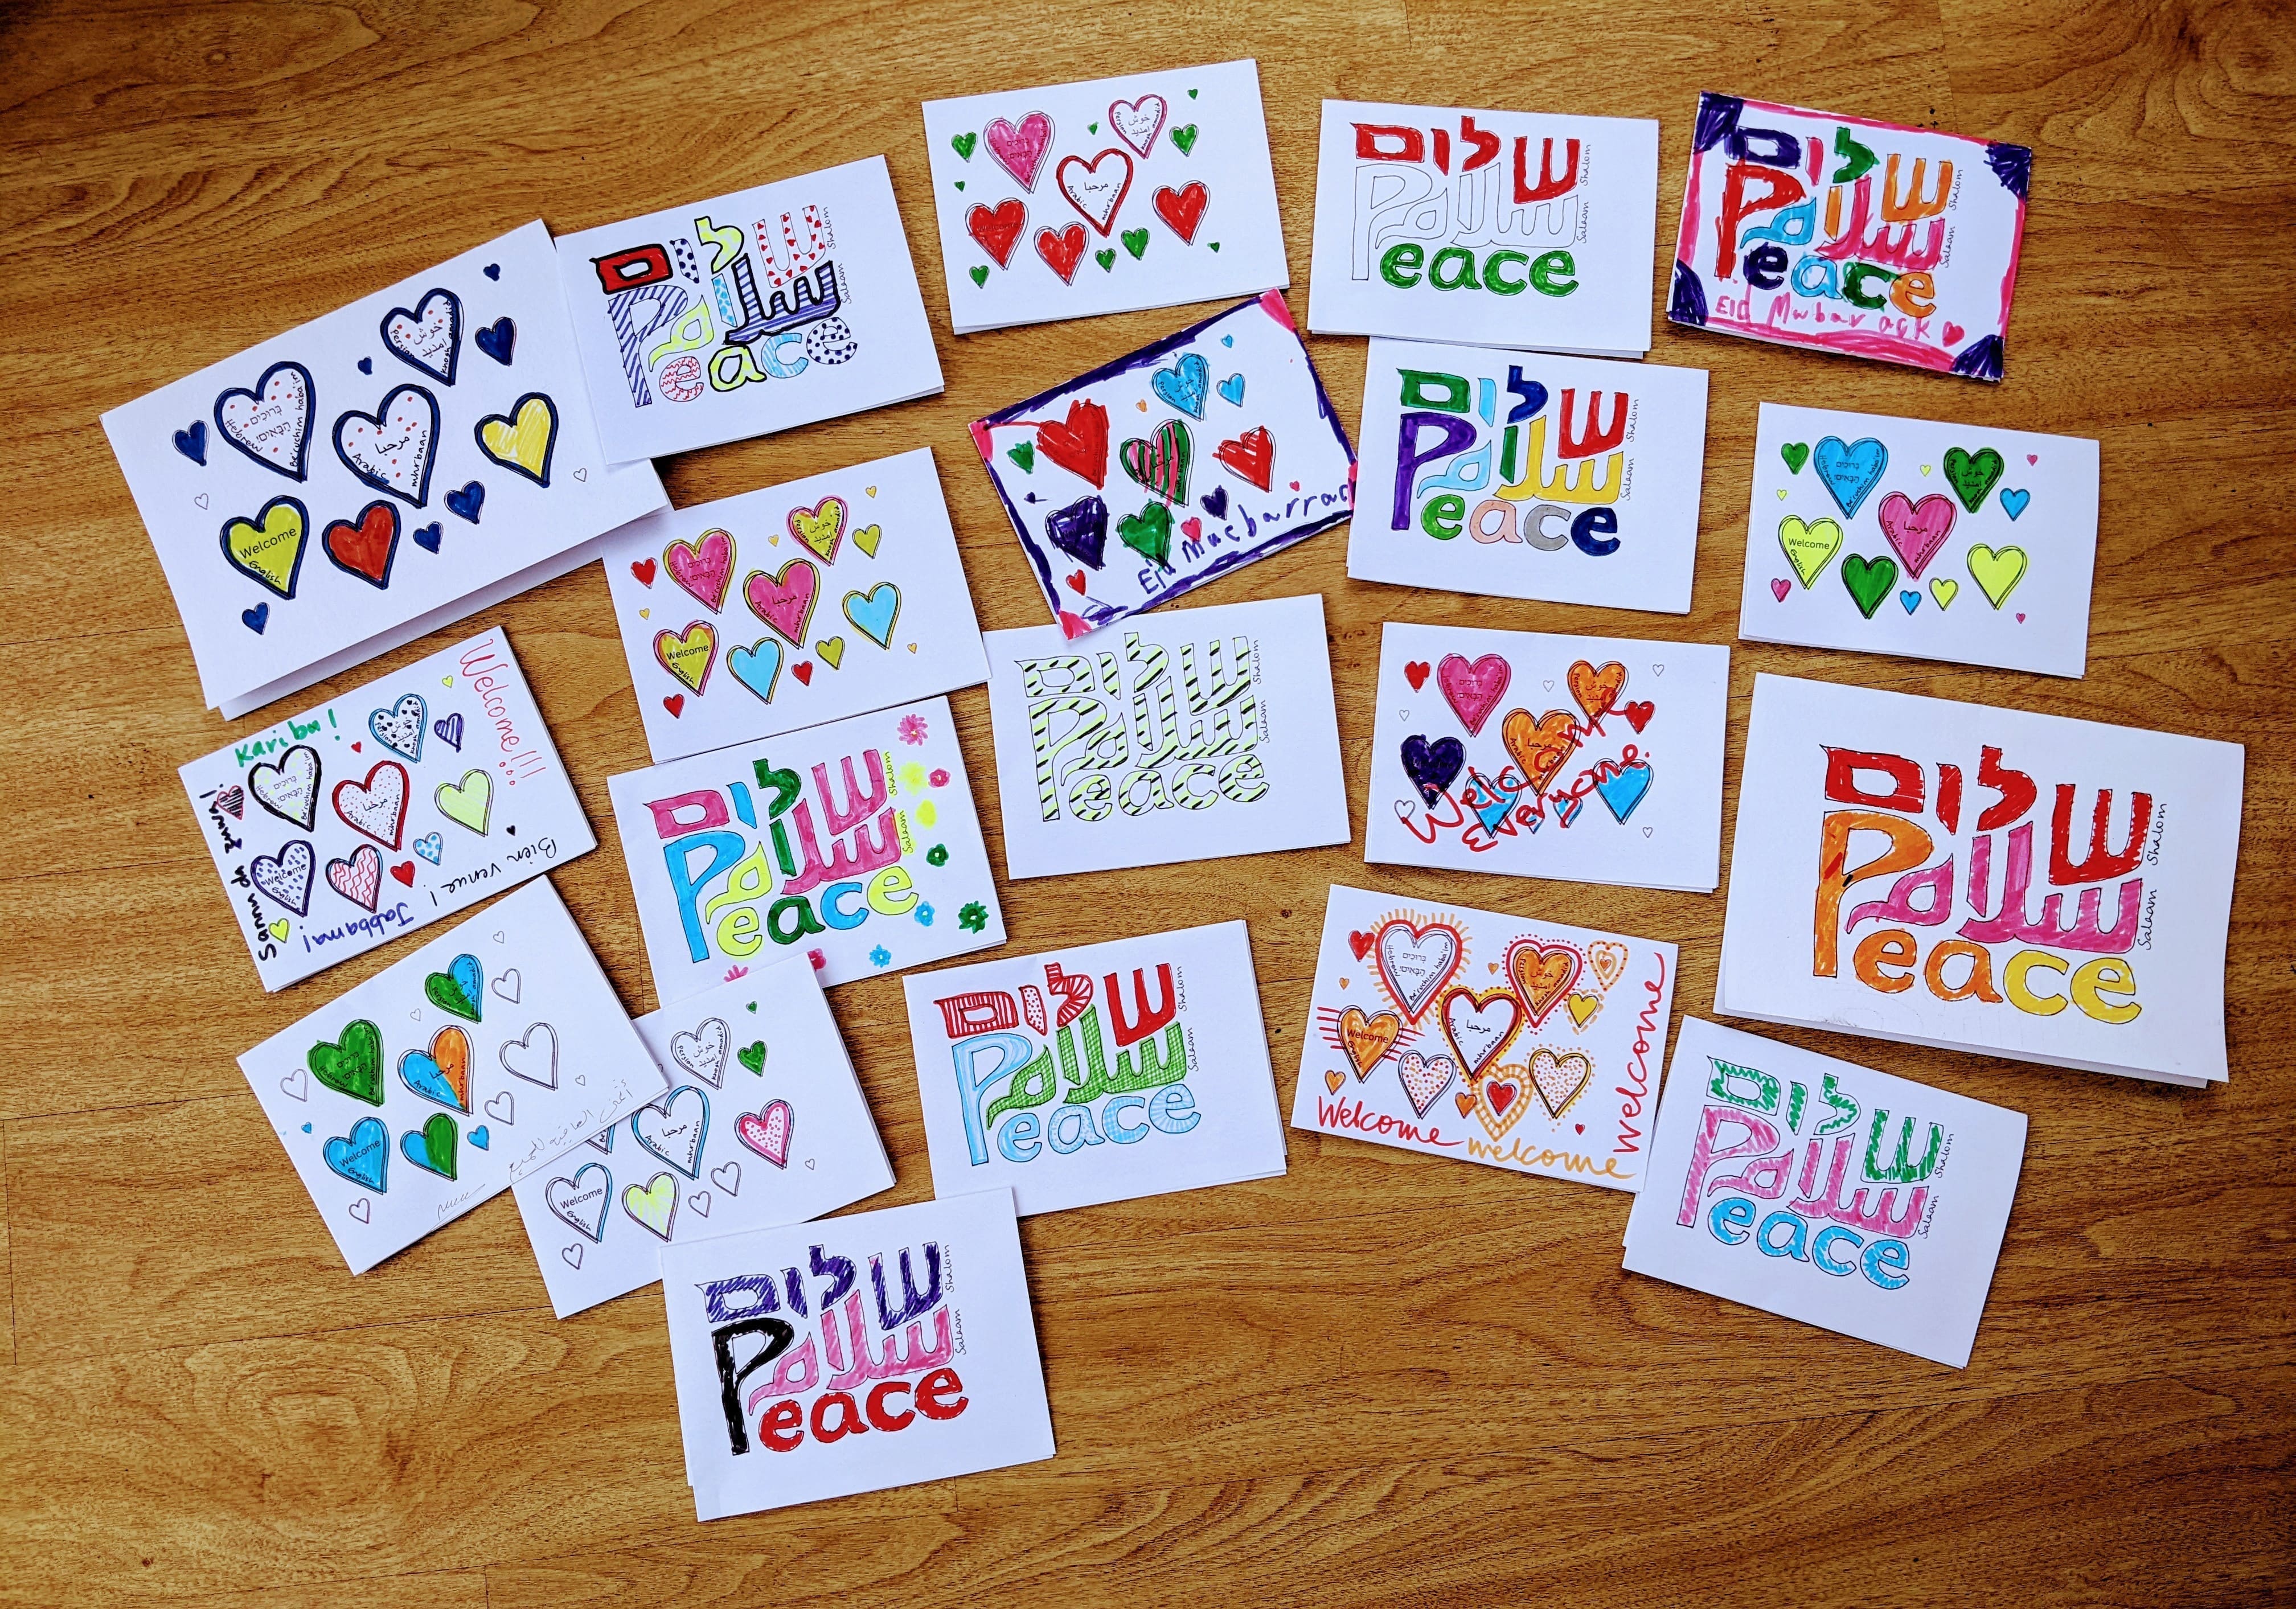 Image of many hand decorated colourful postcards created by members of the service the word peace and shalom in English and Hebrew